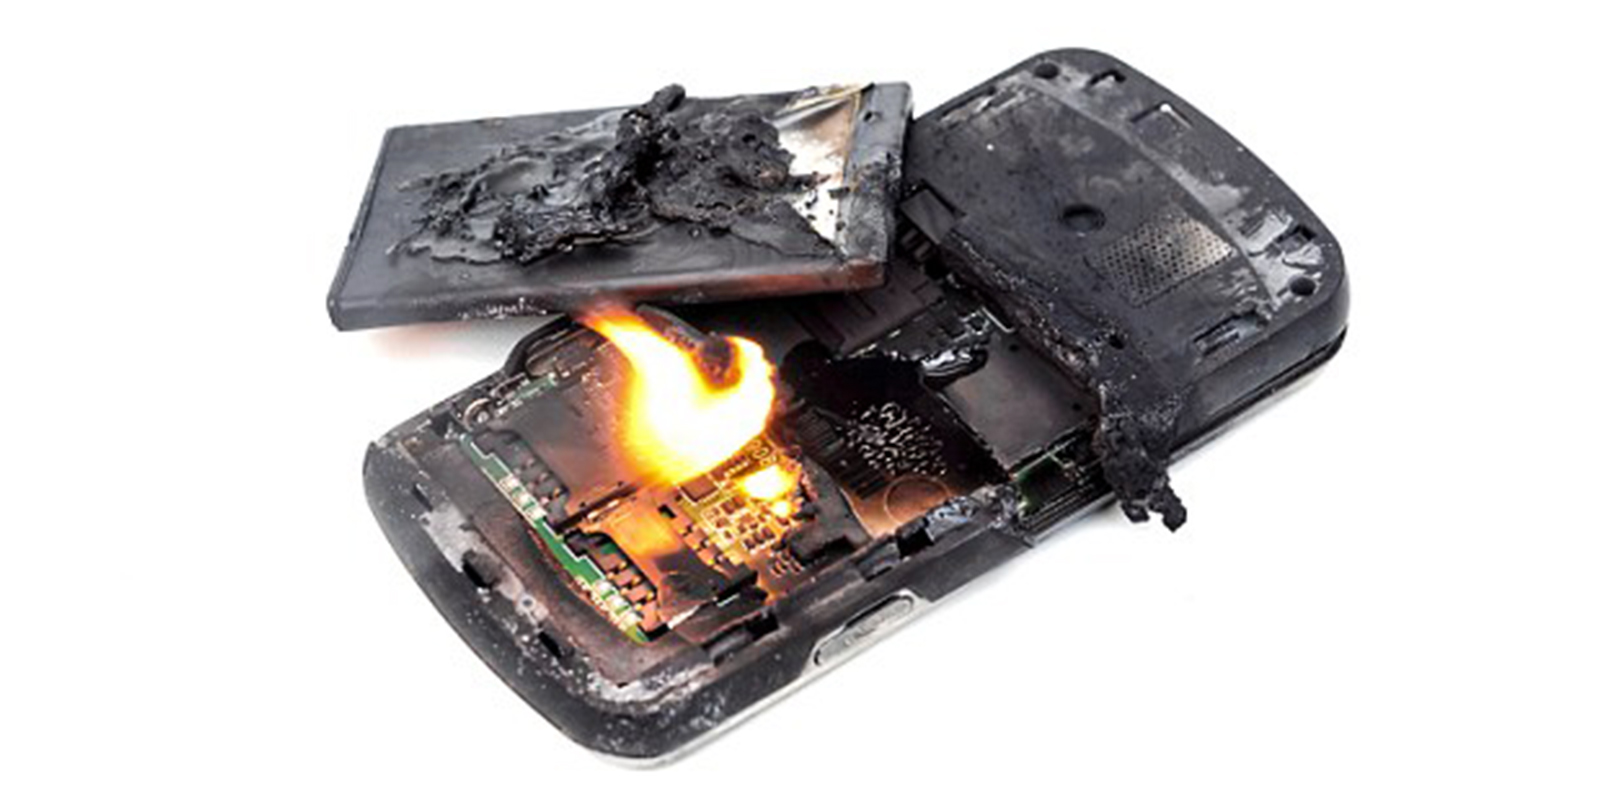 Mistakes that cause mobile phone batteries to explode